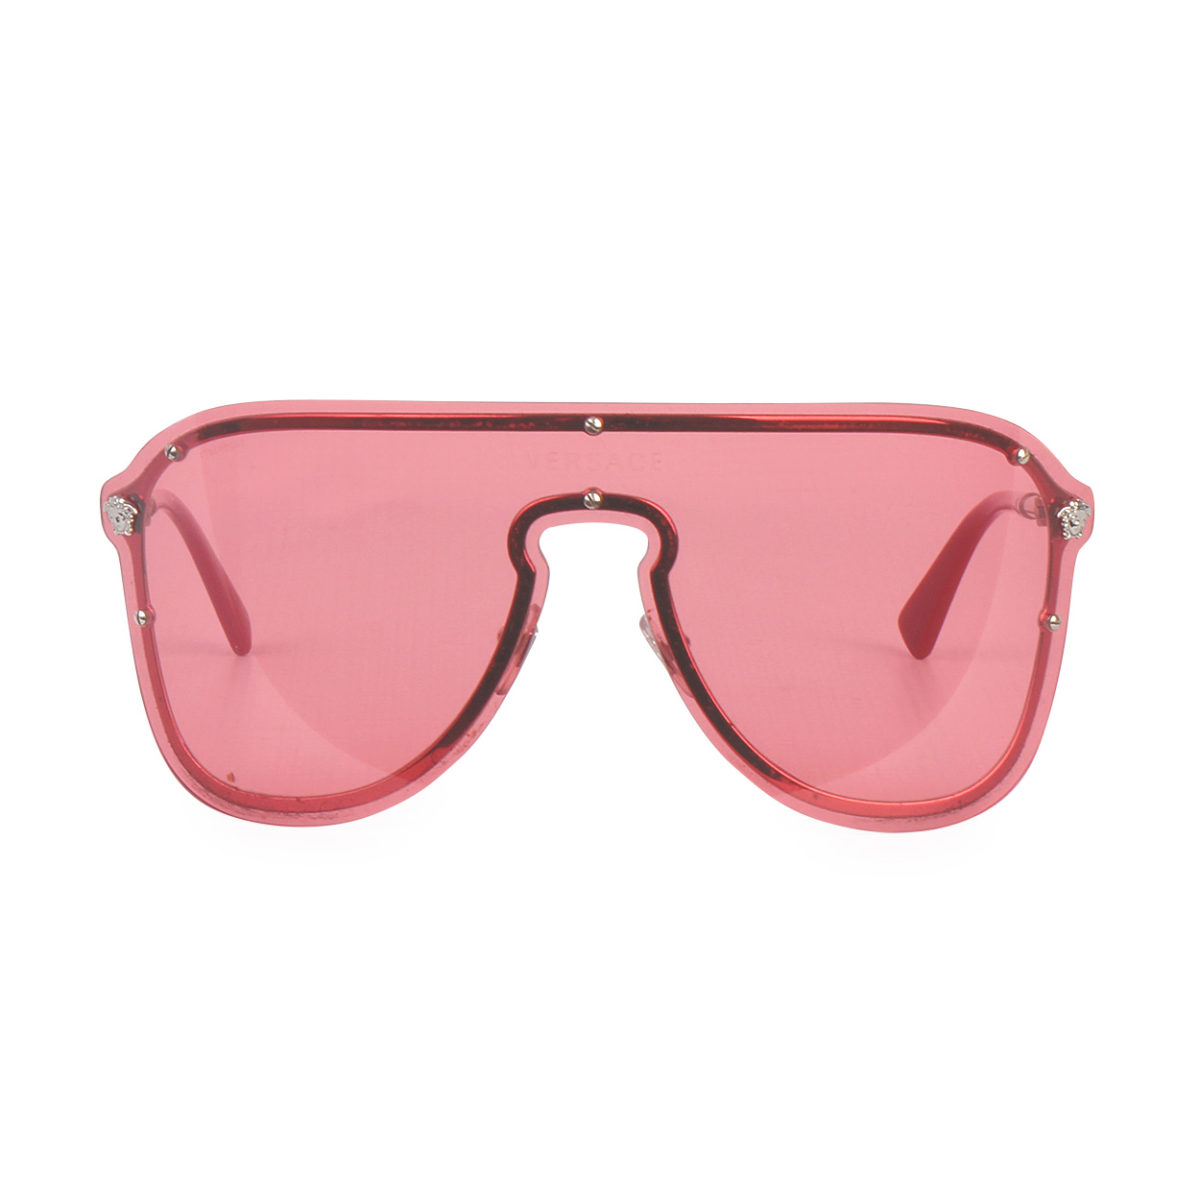 VERSACE Shield Sunglasses 2180 1000/84 Red | Luxity